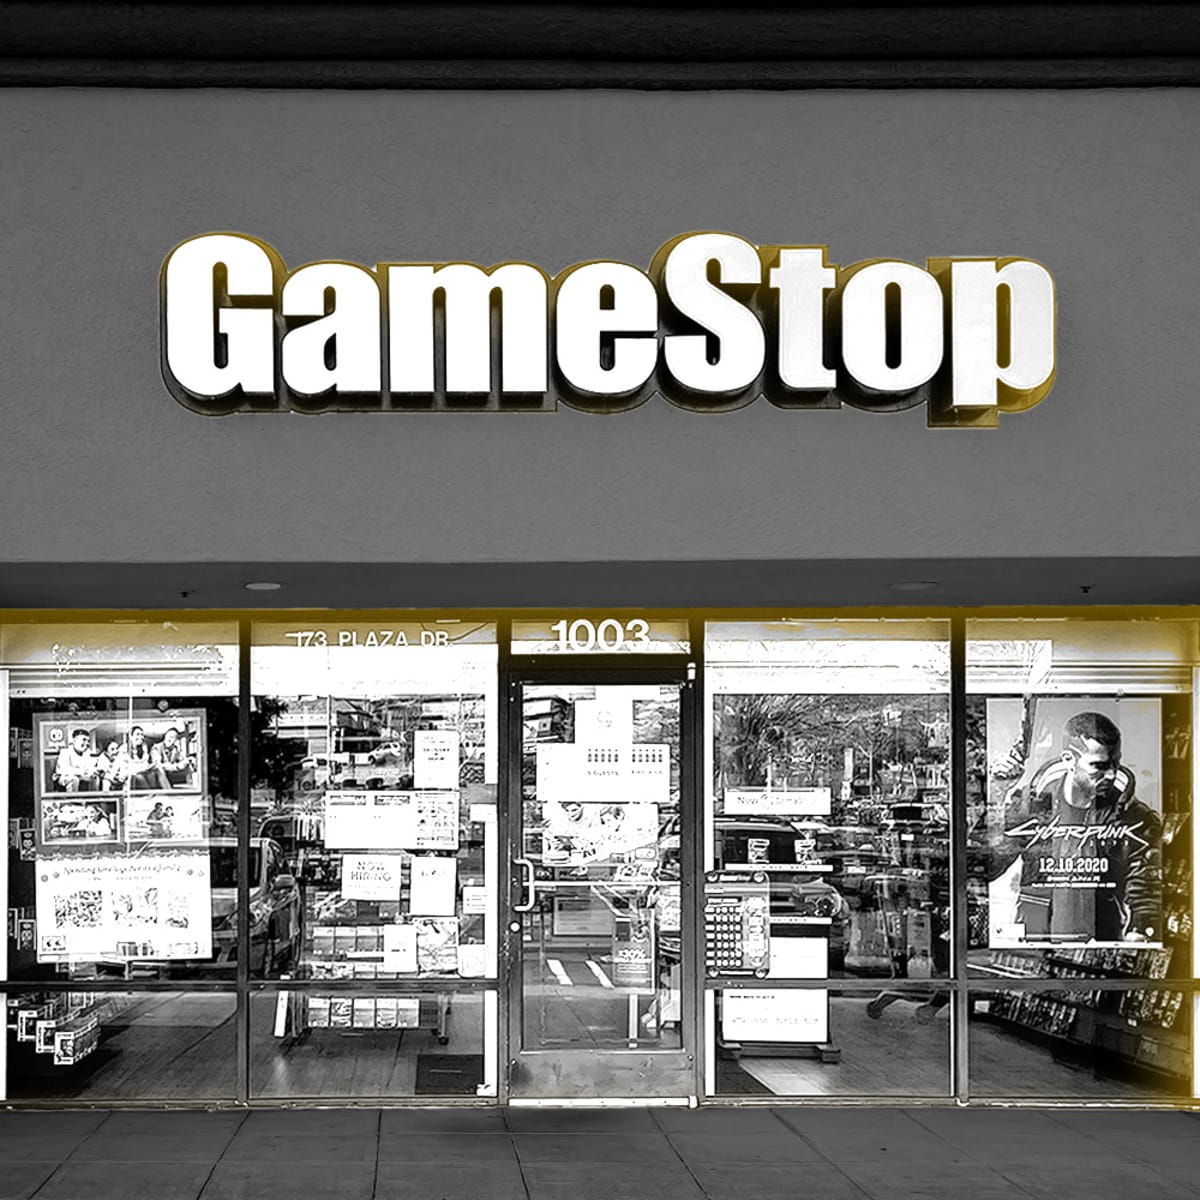 GameStop shares move higher on strong holiday game sales